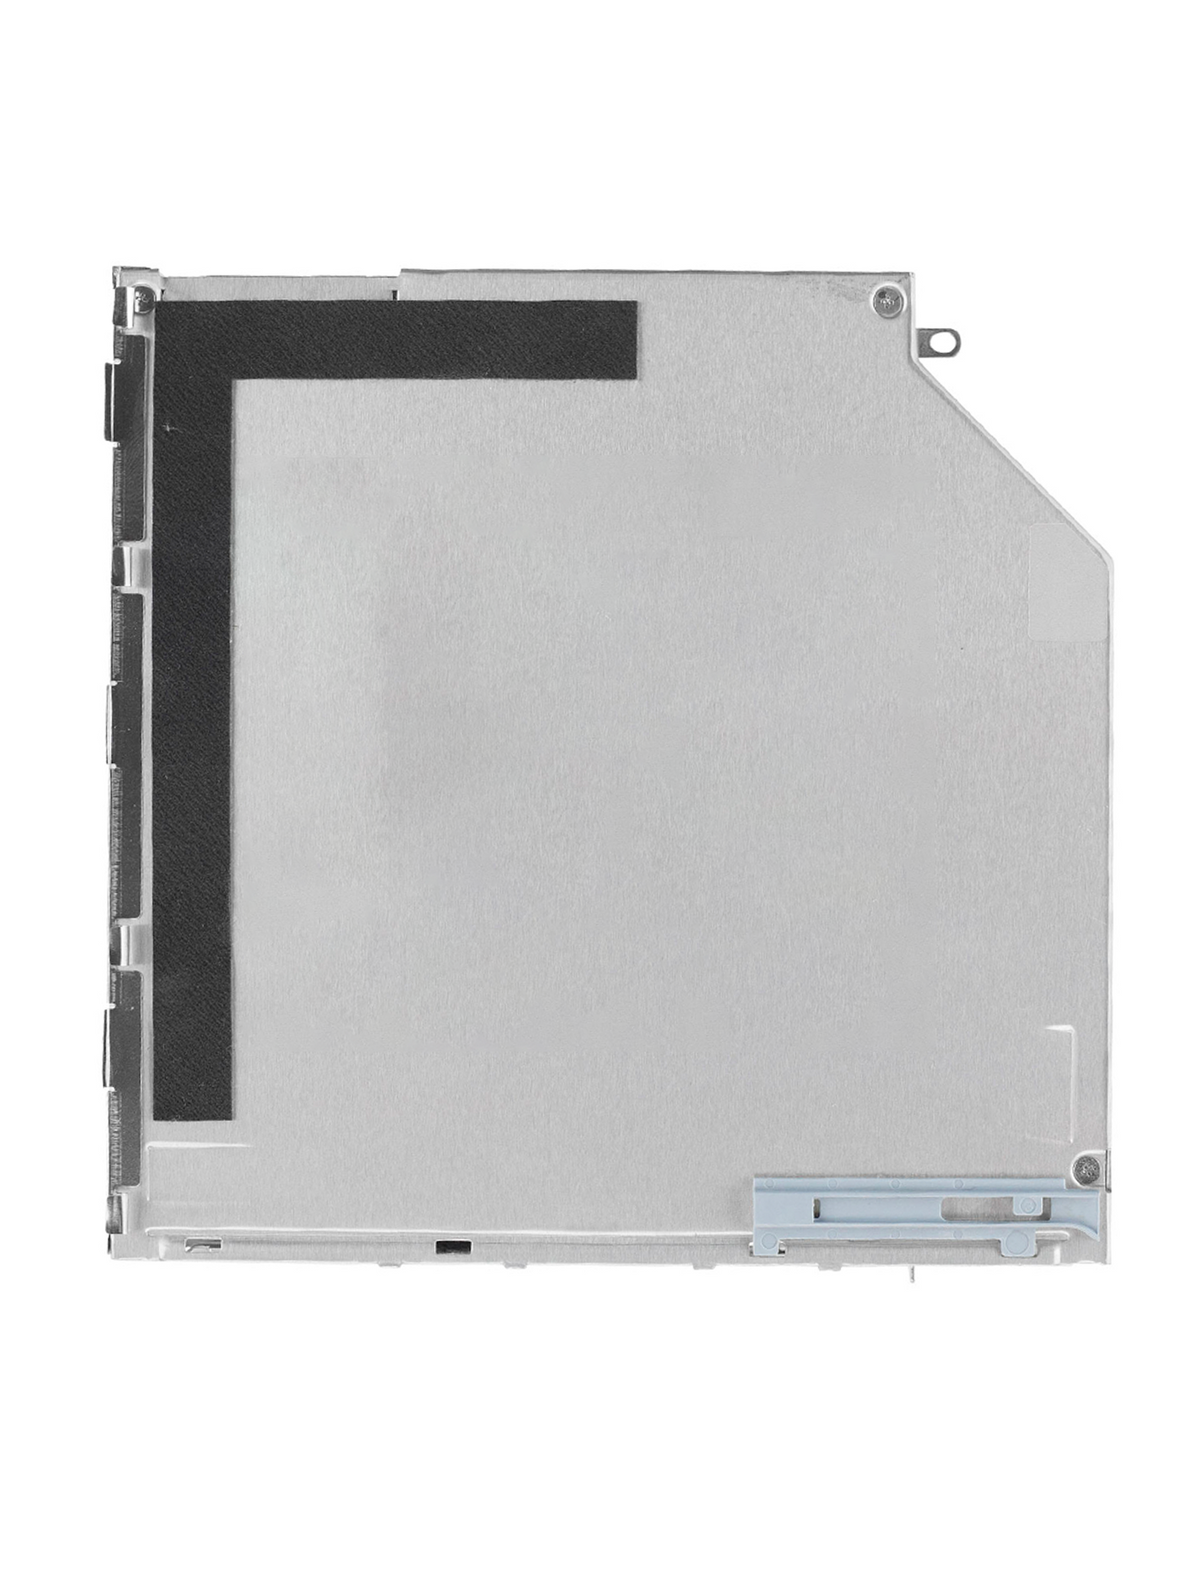 SUPERDRIVE (UJ867A) COMPATIBLE FOR MACBOOK 13" A1181 (EARLY 2009 - MID 2009)